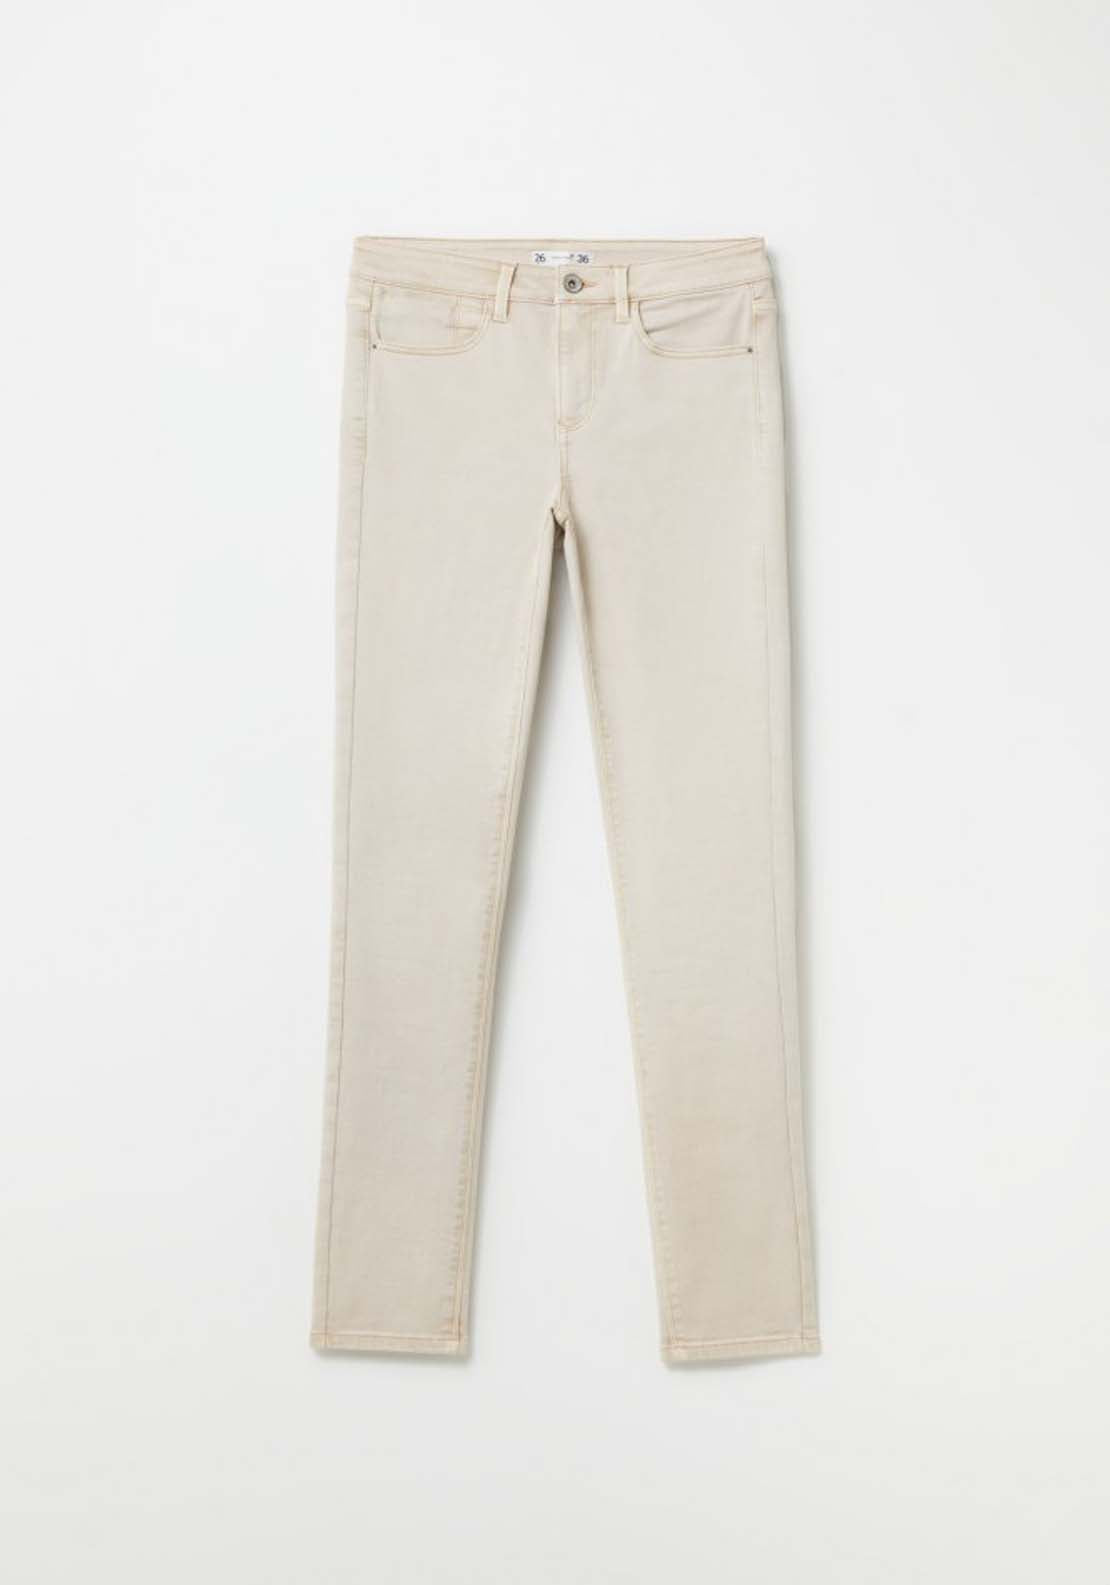 Sfera Coloured skinny jeans - Grey 5 Shaws Department Stores